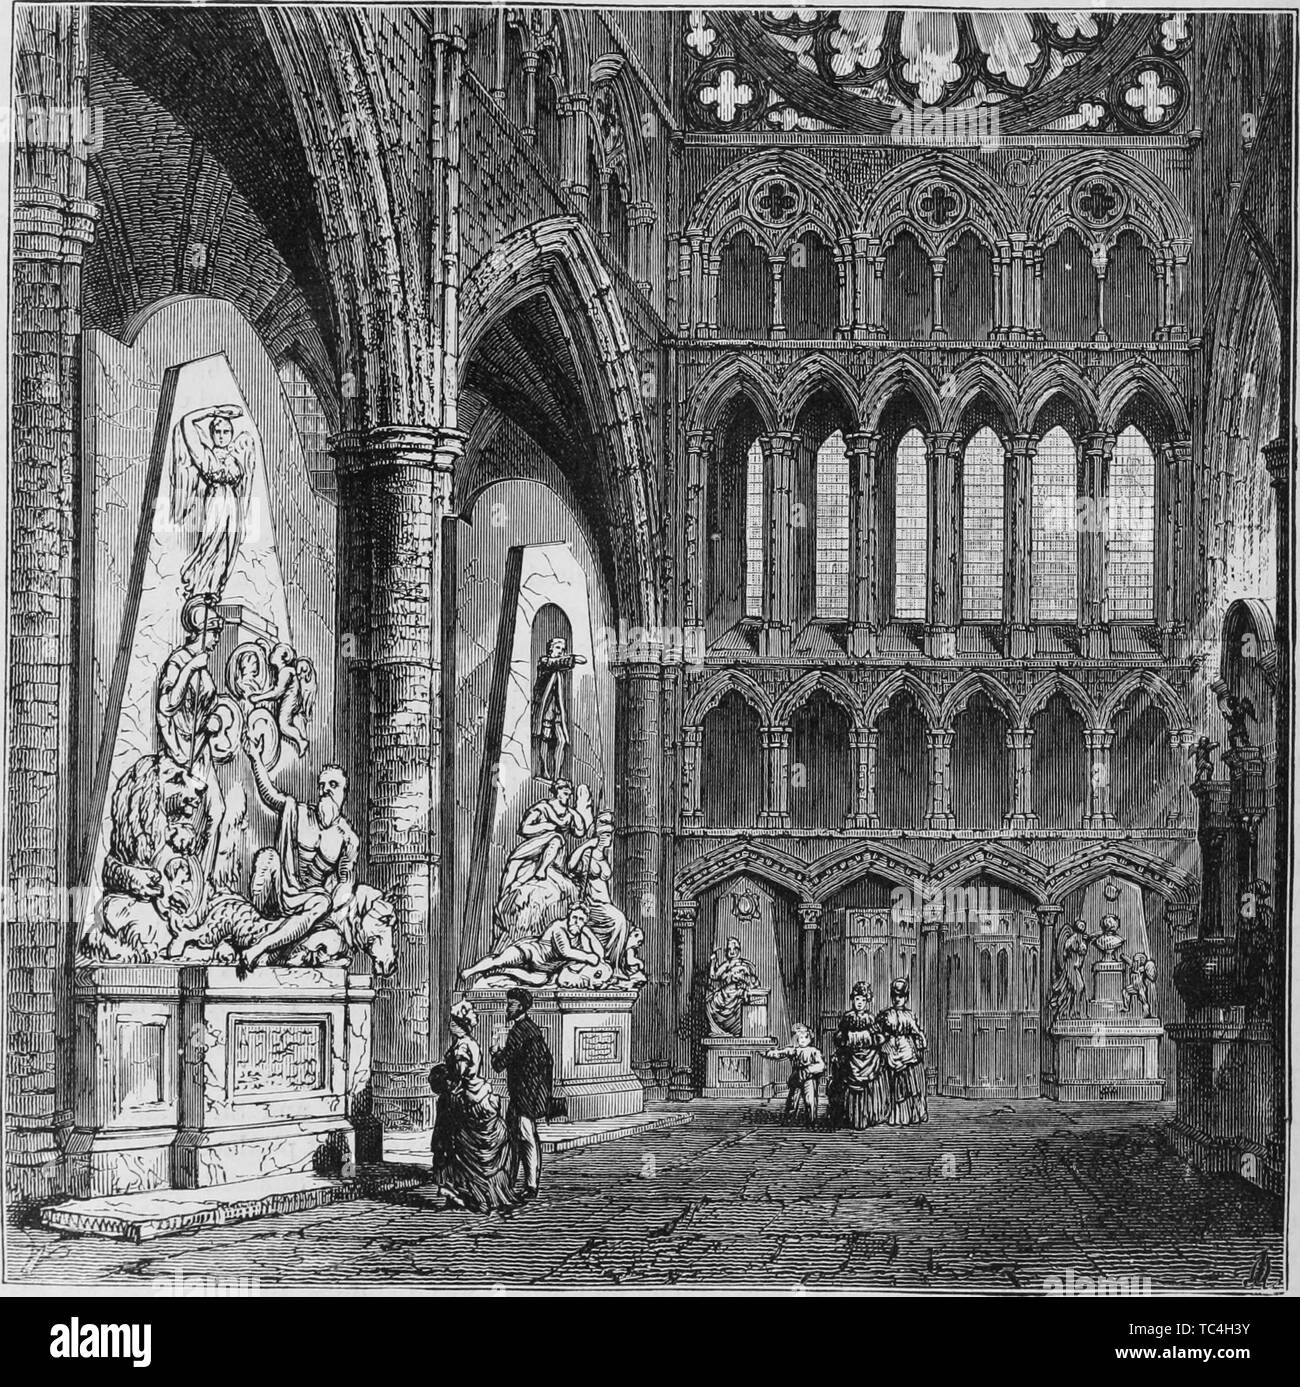 Engraving of the North Transept of Westminster Abbey, London, England, from the book 'Old and new London: a narrative of its history, its people, and its places' by Thornbury Walter, 1873. Courtesy Internet Archive. () Stock Photo